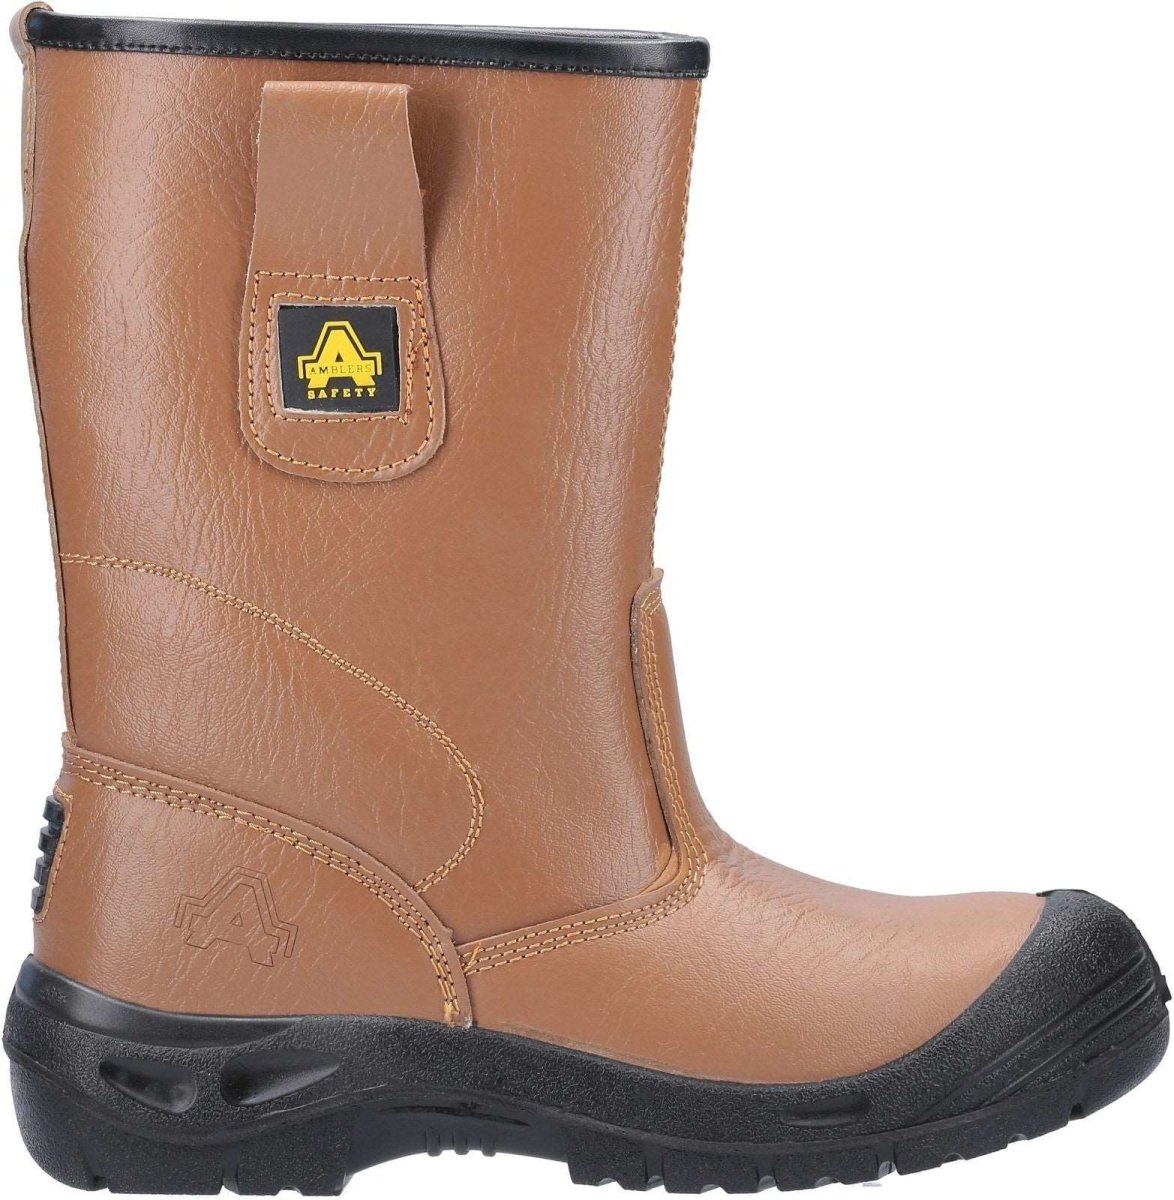 Amblers FS142 Safety Rigger Boots - Shoe Store Direct